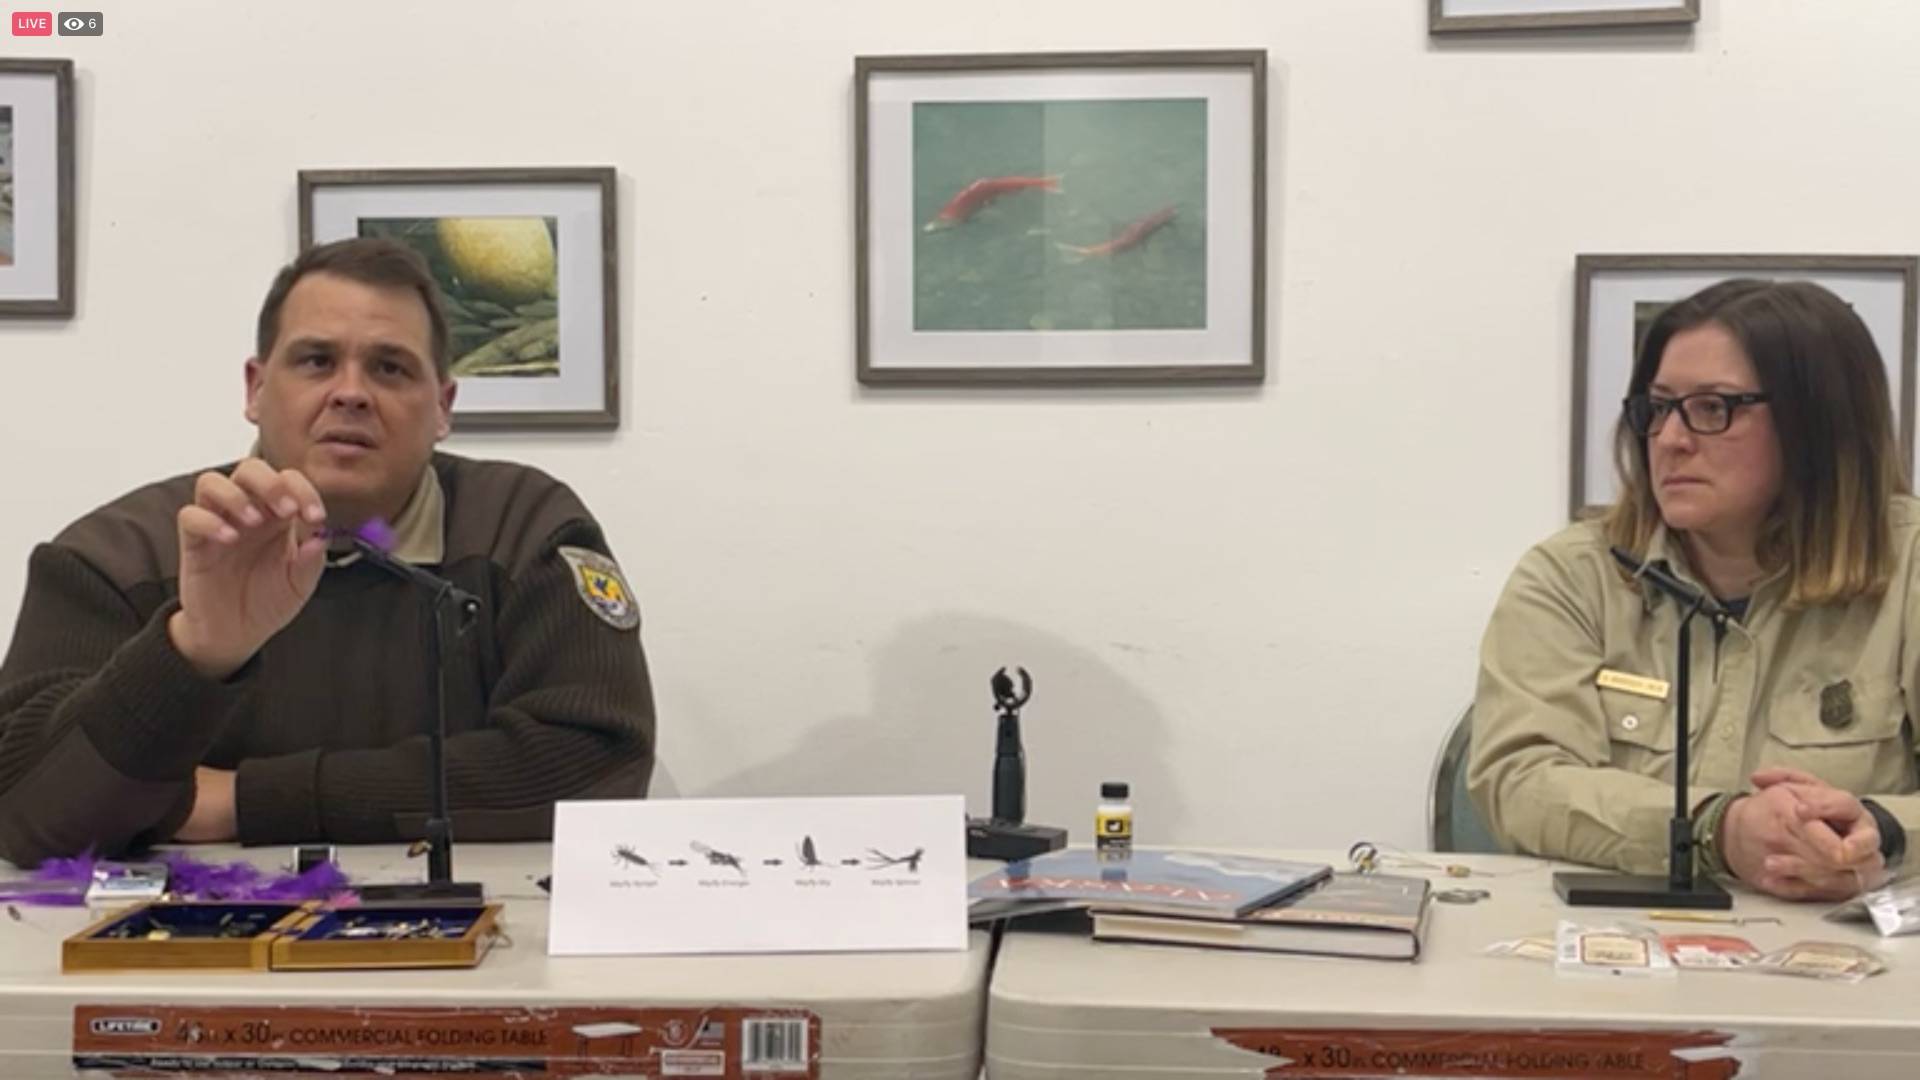 Matt Conner (left) and Amber Kraxberger-Linson demonstrate how to tie flies during a remote workshop on Friday, March 26, 2021, in Alaska. (Screenshot)